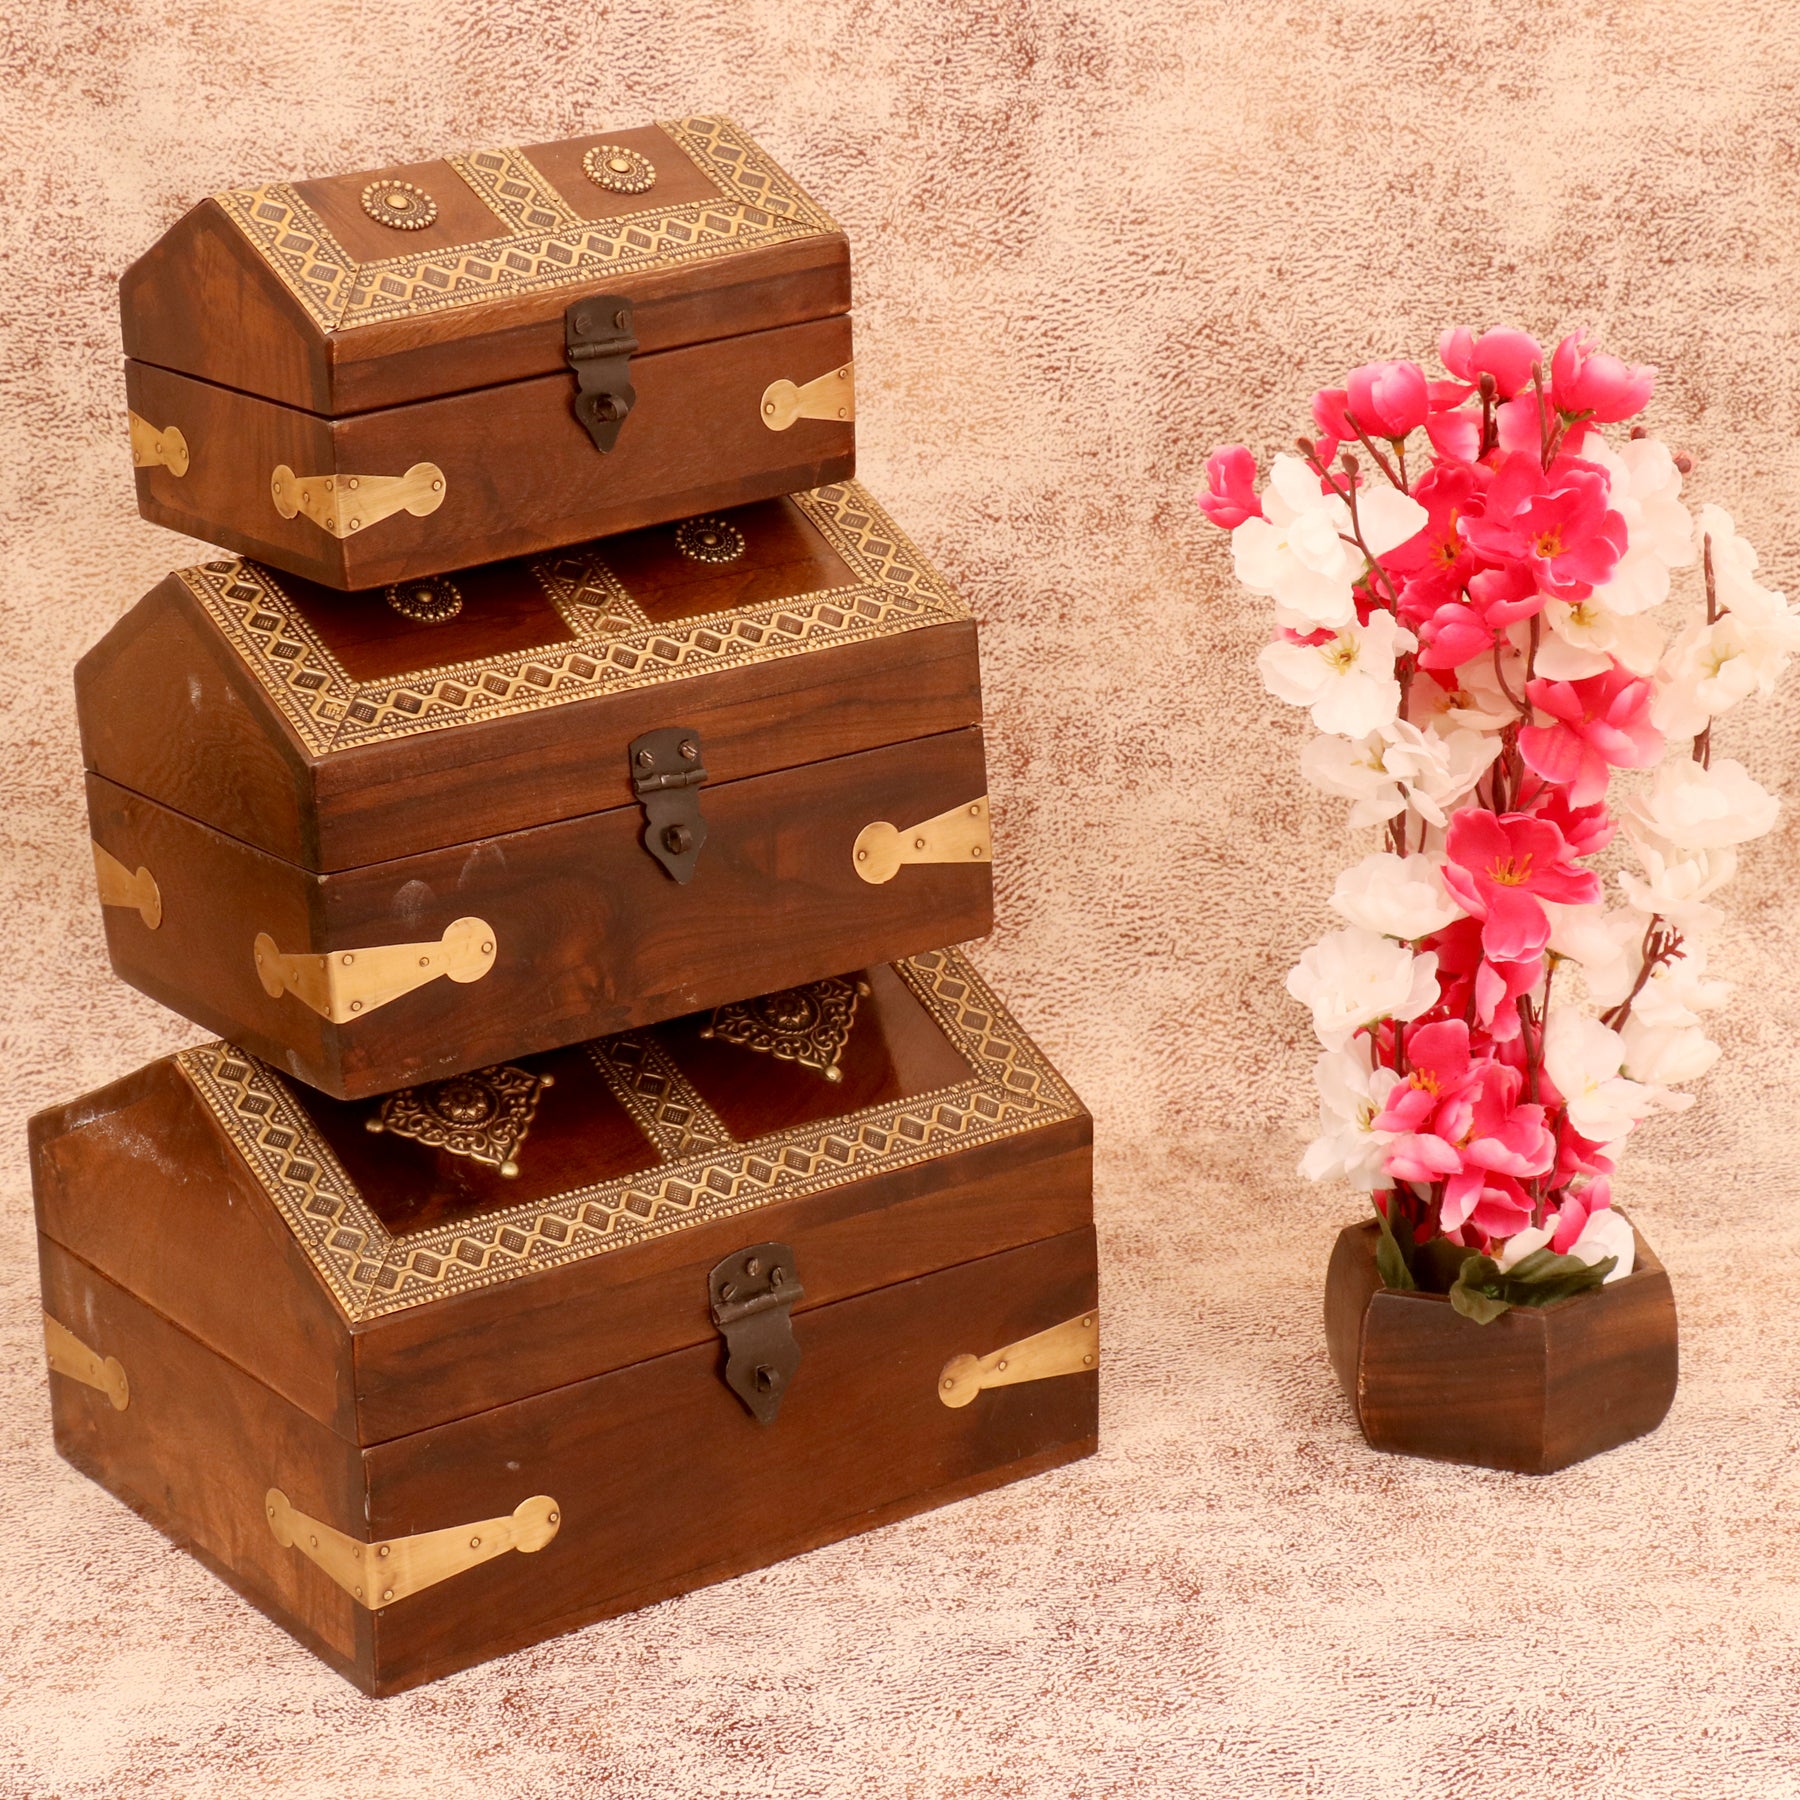 Wooden Rustic Hut Shaped Boxes Wooden Box